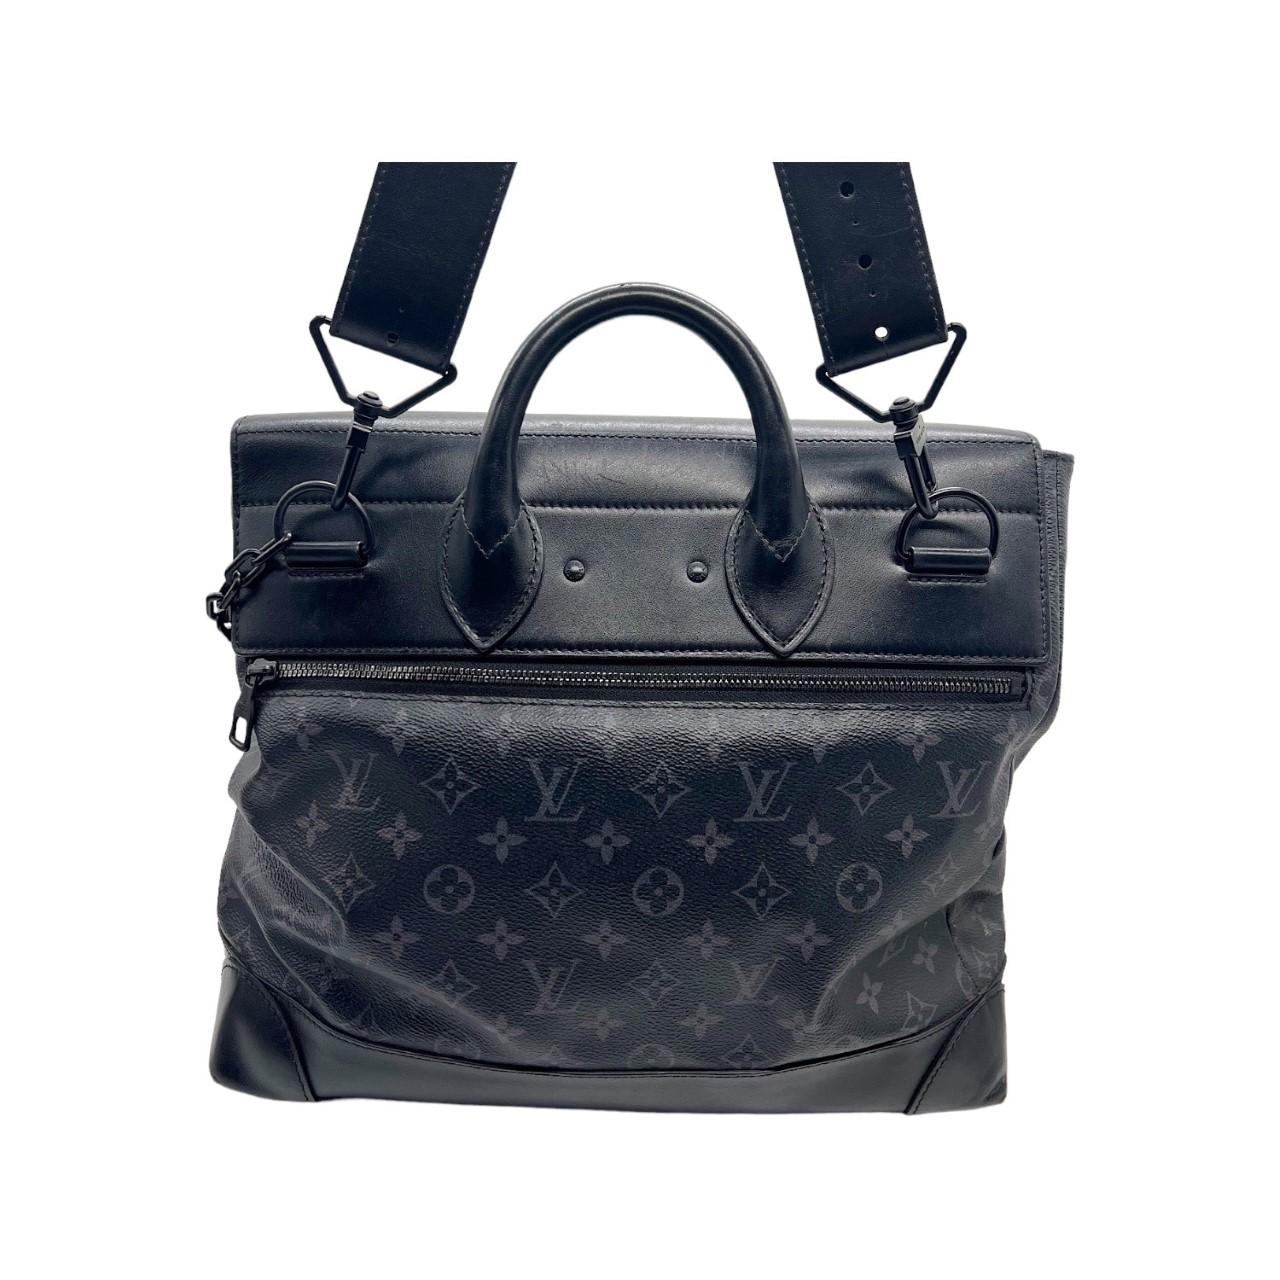 We are offering this authentic Louis Vuitton Monogram PM. Made in France, this bag is made with a combination of black leather and the classic LV monogram pattern. It comes with a removeable black leather shoulder strap and matte black hardware. It